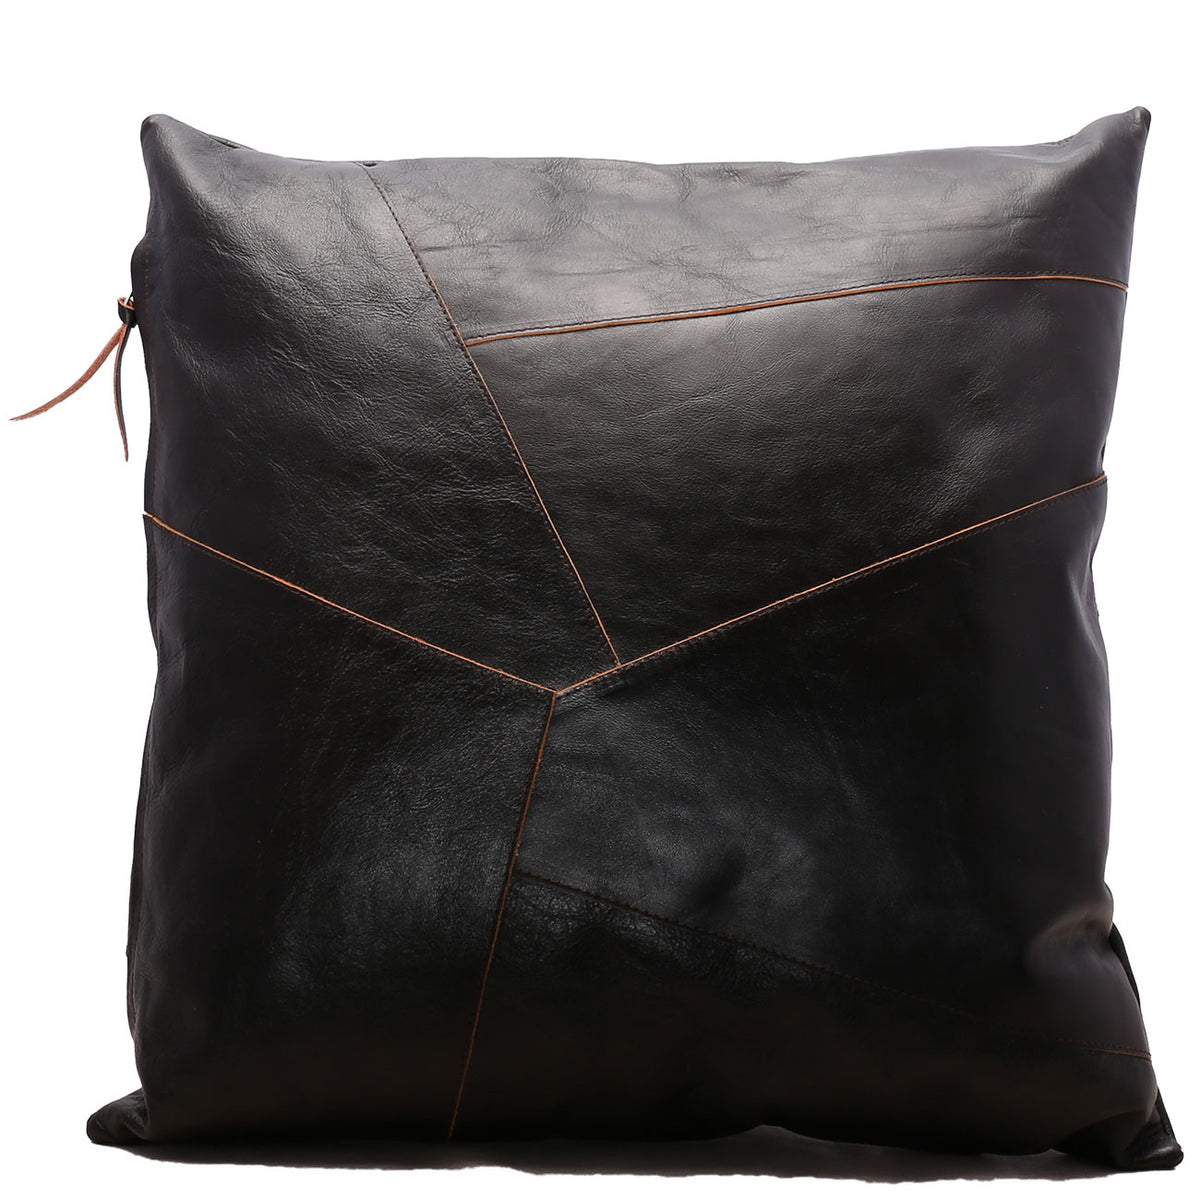 The Real McCoy's MW18001 Horsehide Cushion, Large